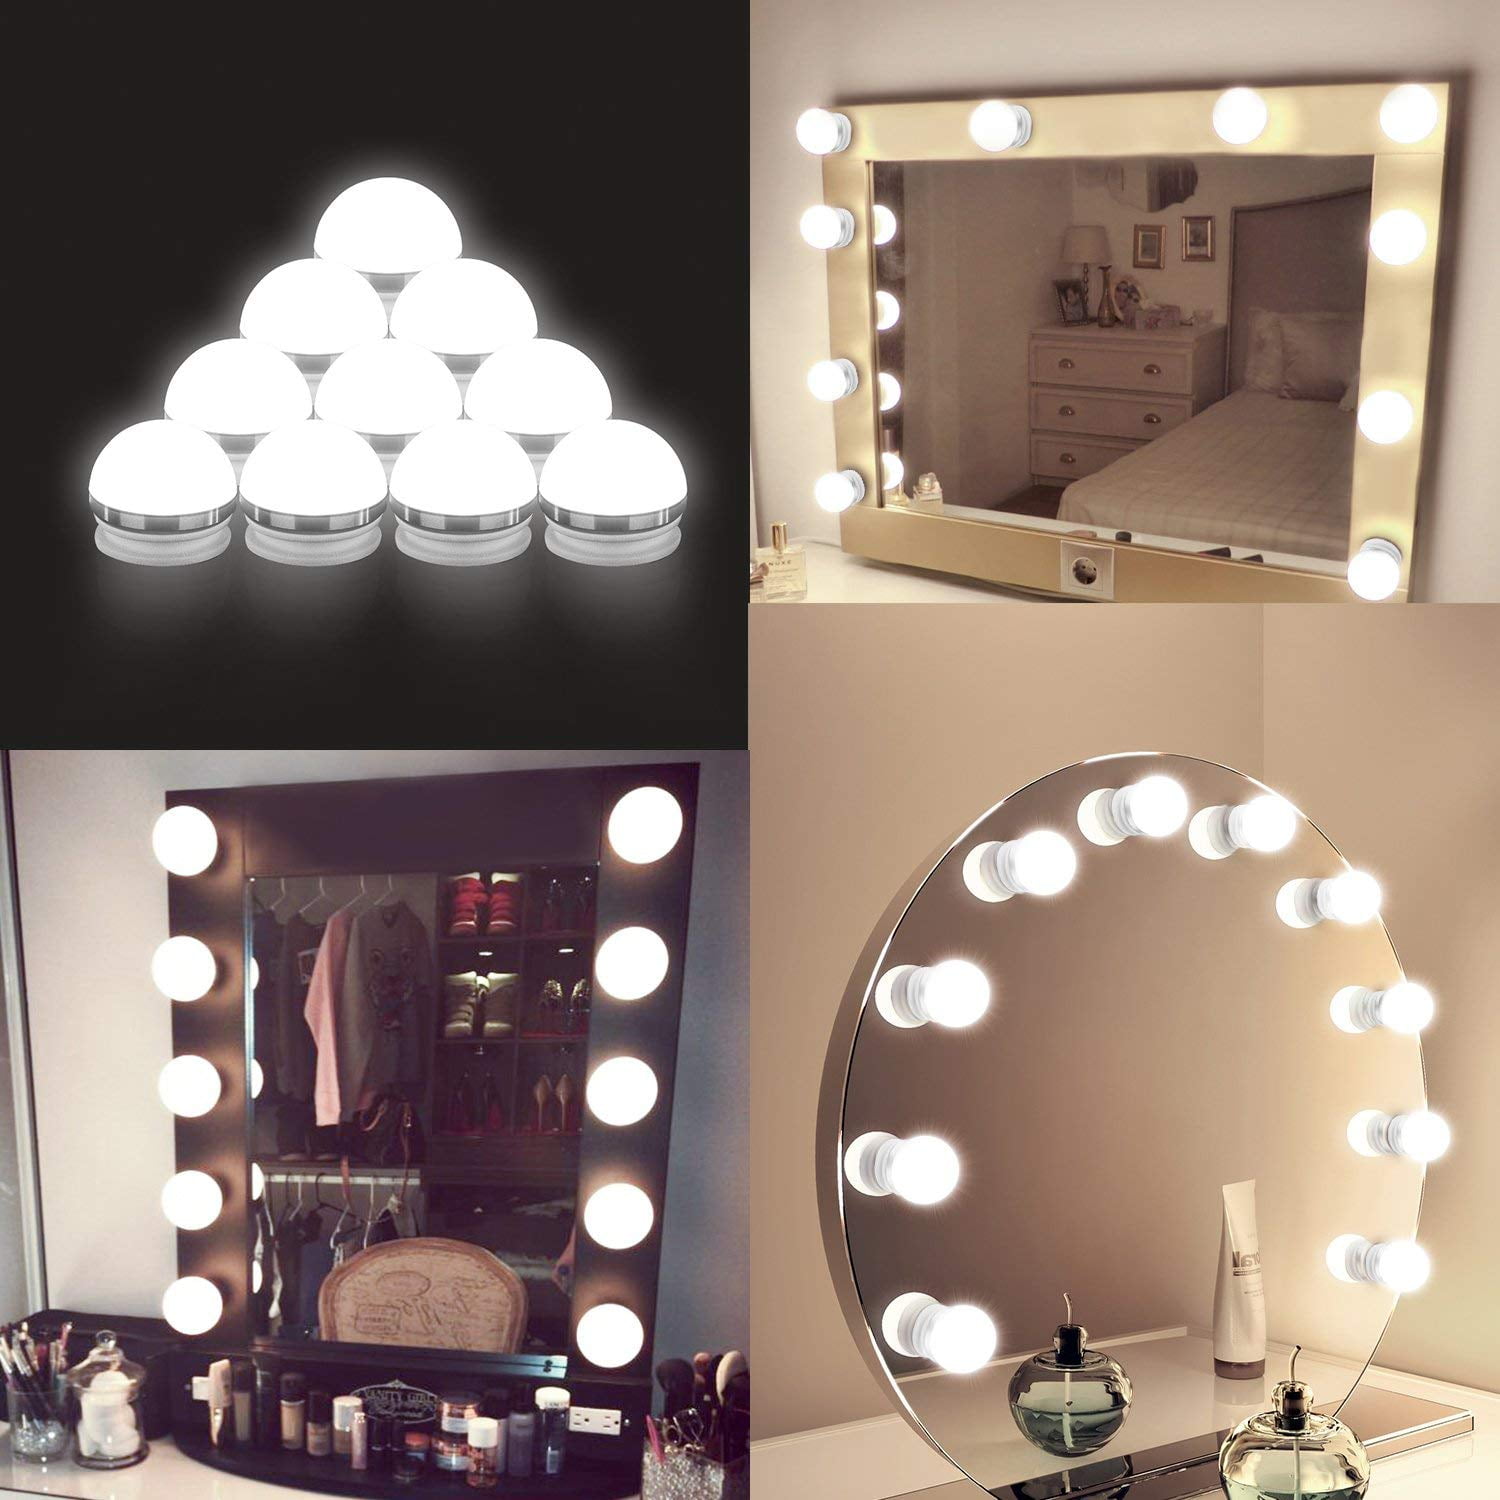 Color : Two-Color Light Solid Wood Wall Lamp LED Mirror Headlight Mirror Cabinet Light Makeup Lamp Bathroom Mirror Lamp,Bath Mirror Lamps Bathroom Vanity Lighting